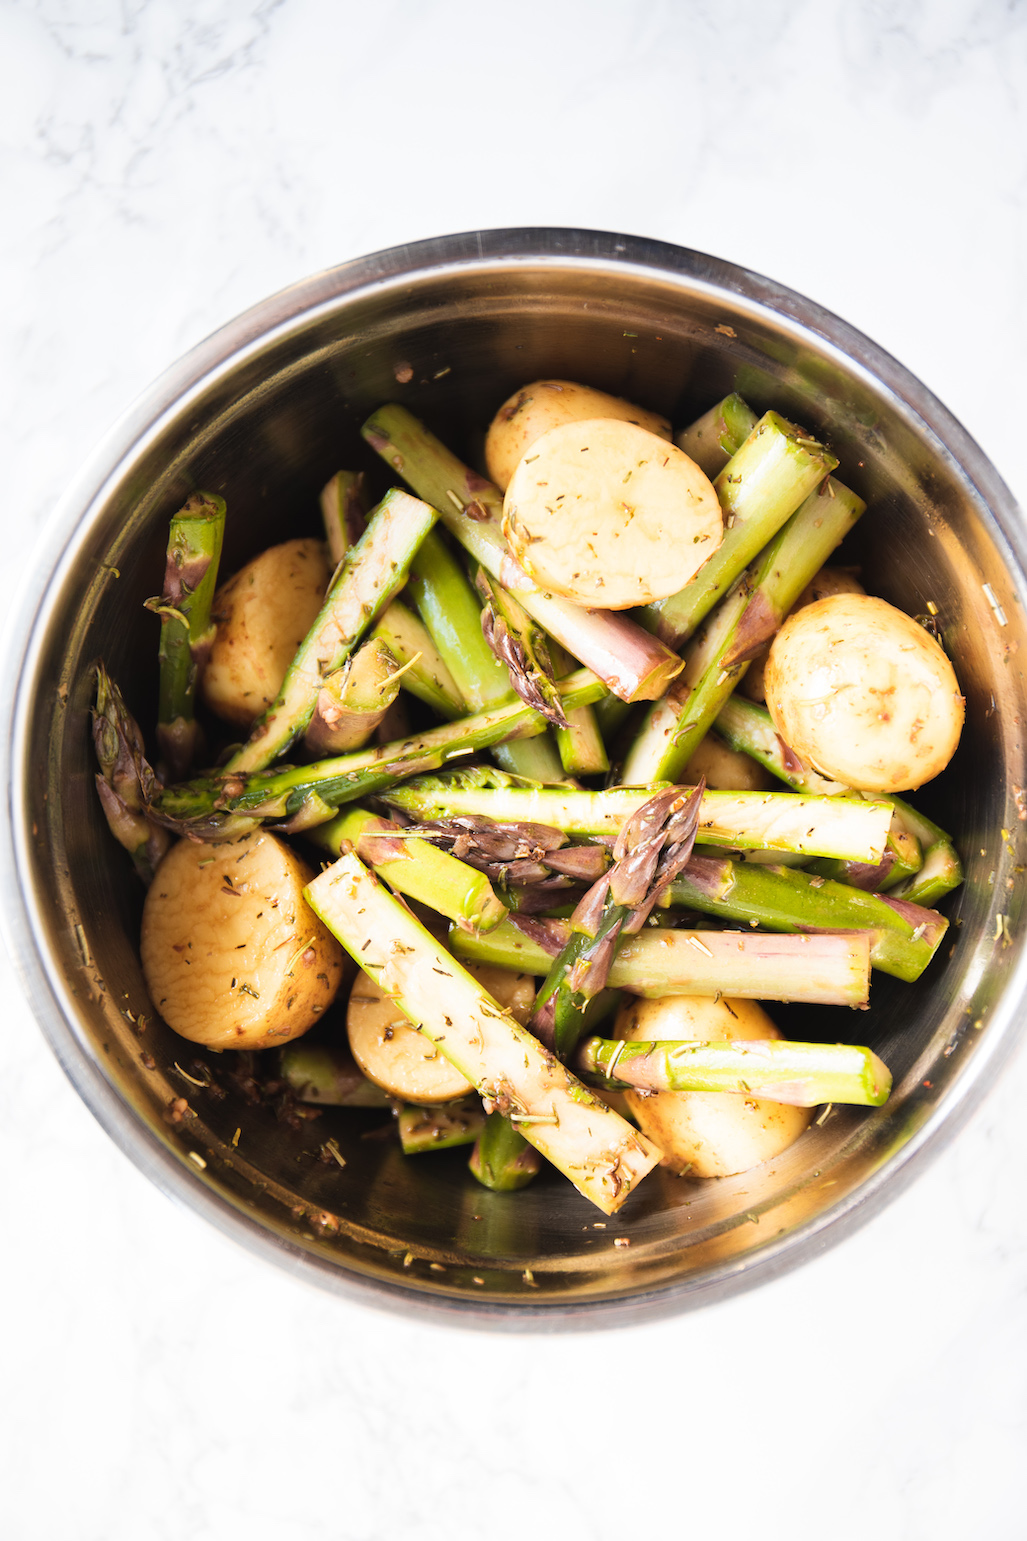 Potatoes and asparagus in a bowl